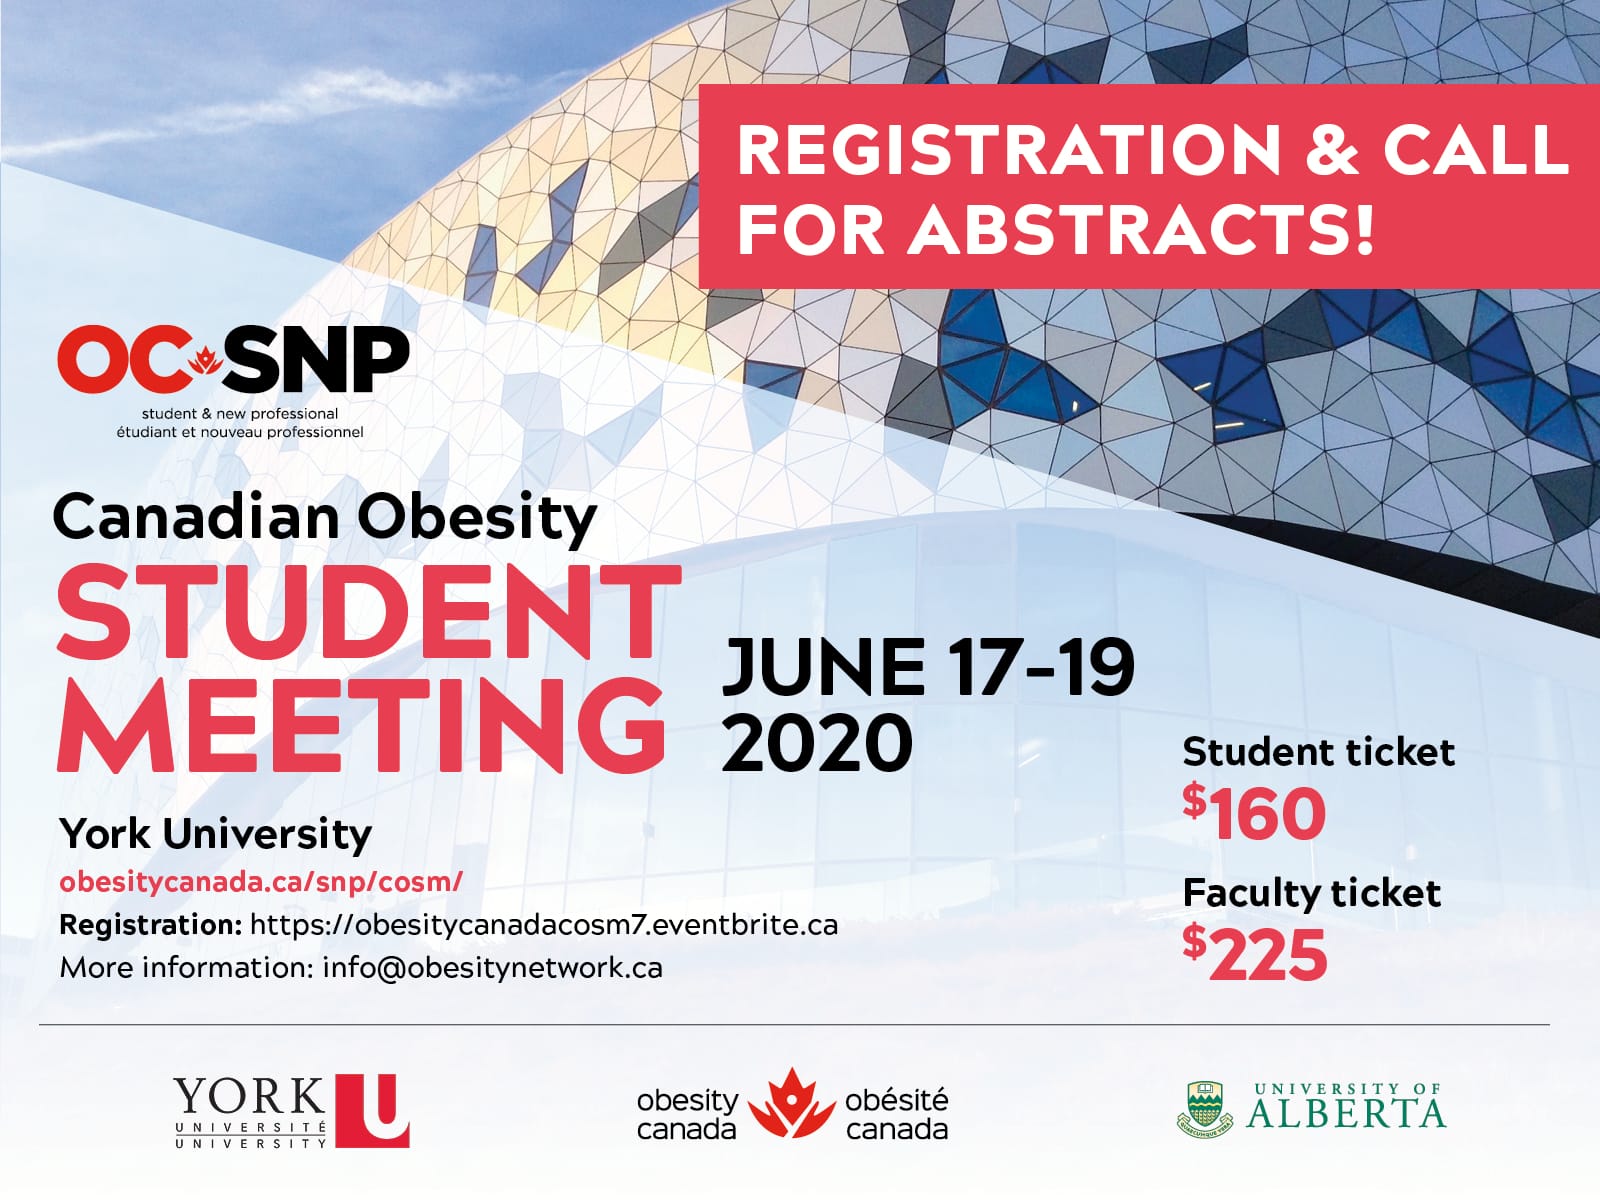 Promotional poster for the 2020 oc-snp student meeting at york university, featuring event details and pricing, set against a geometric building background.